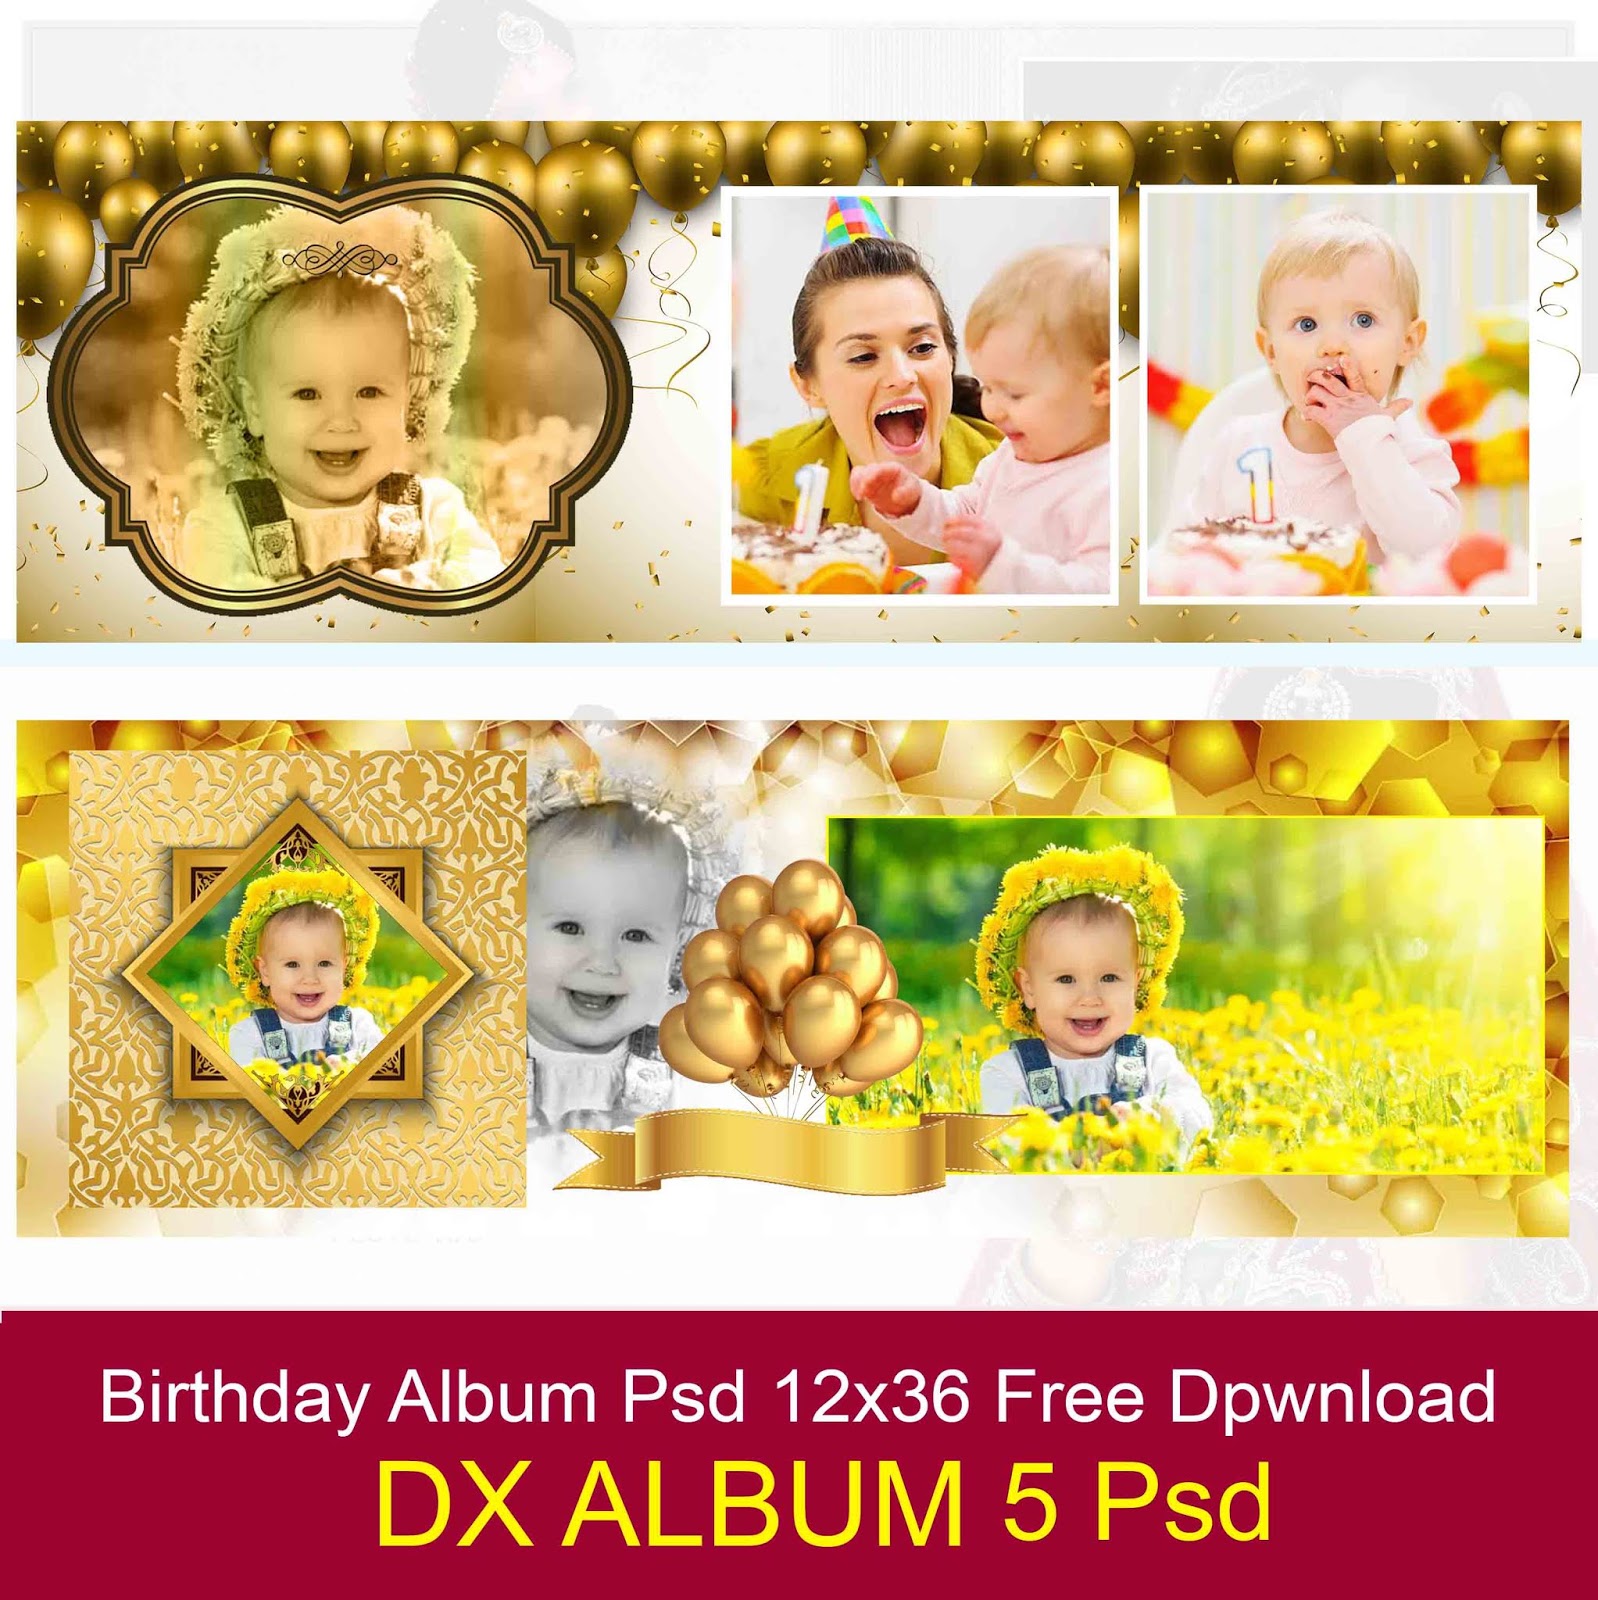 Download Dx Album Birthday Golden Backgrounds Album 12x36 Psd Template Free Download PSD Mockup Templates